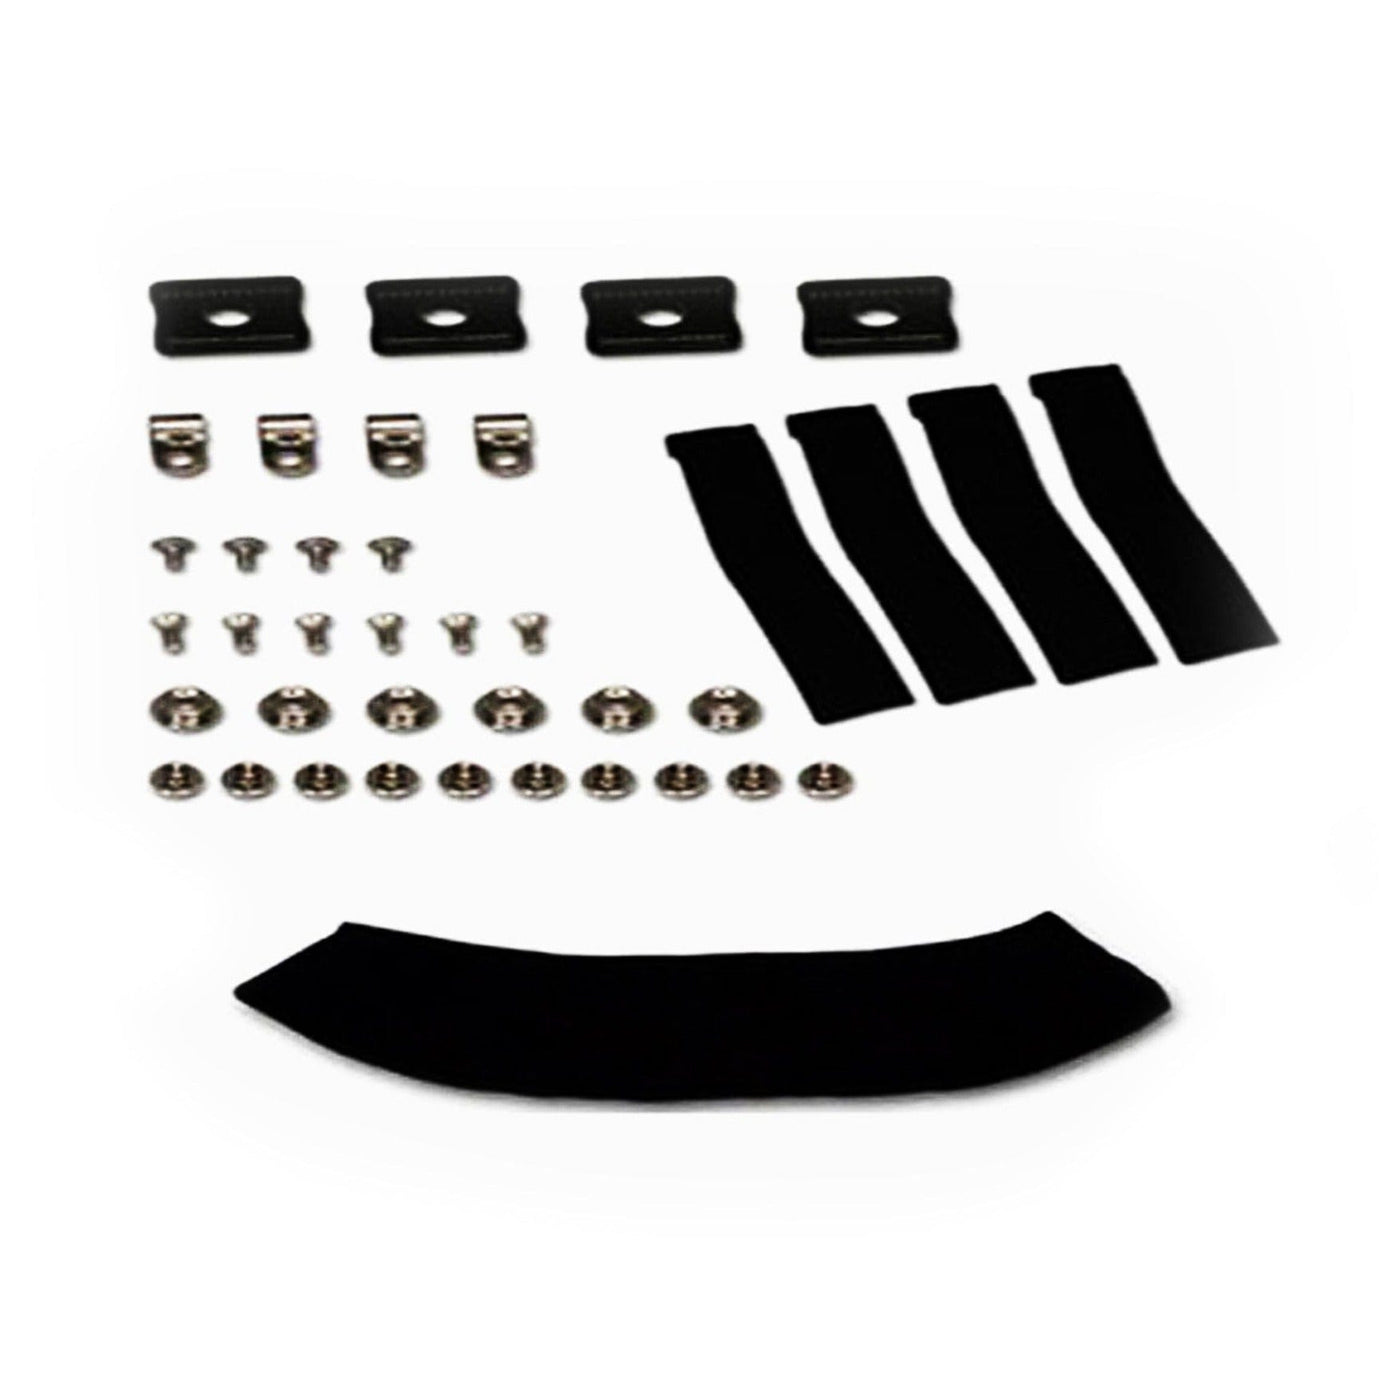 Sportmask Hardware Kit 1 - The Hockey Shop Source For Sports